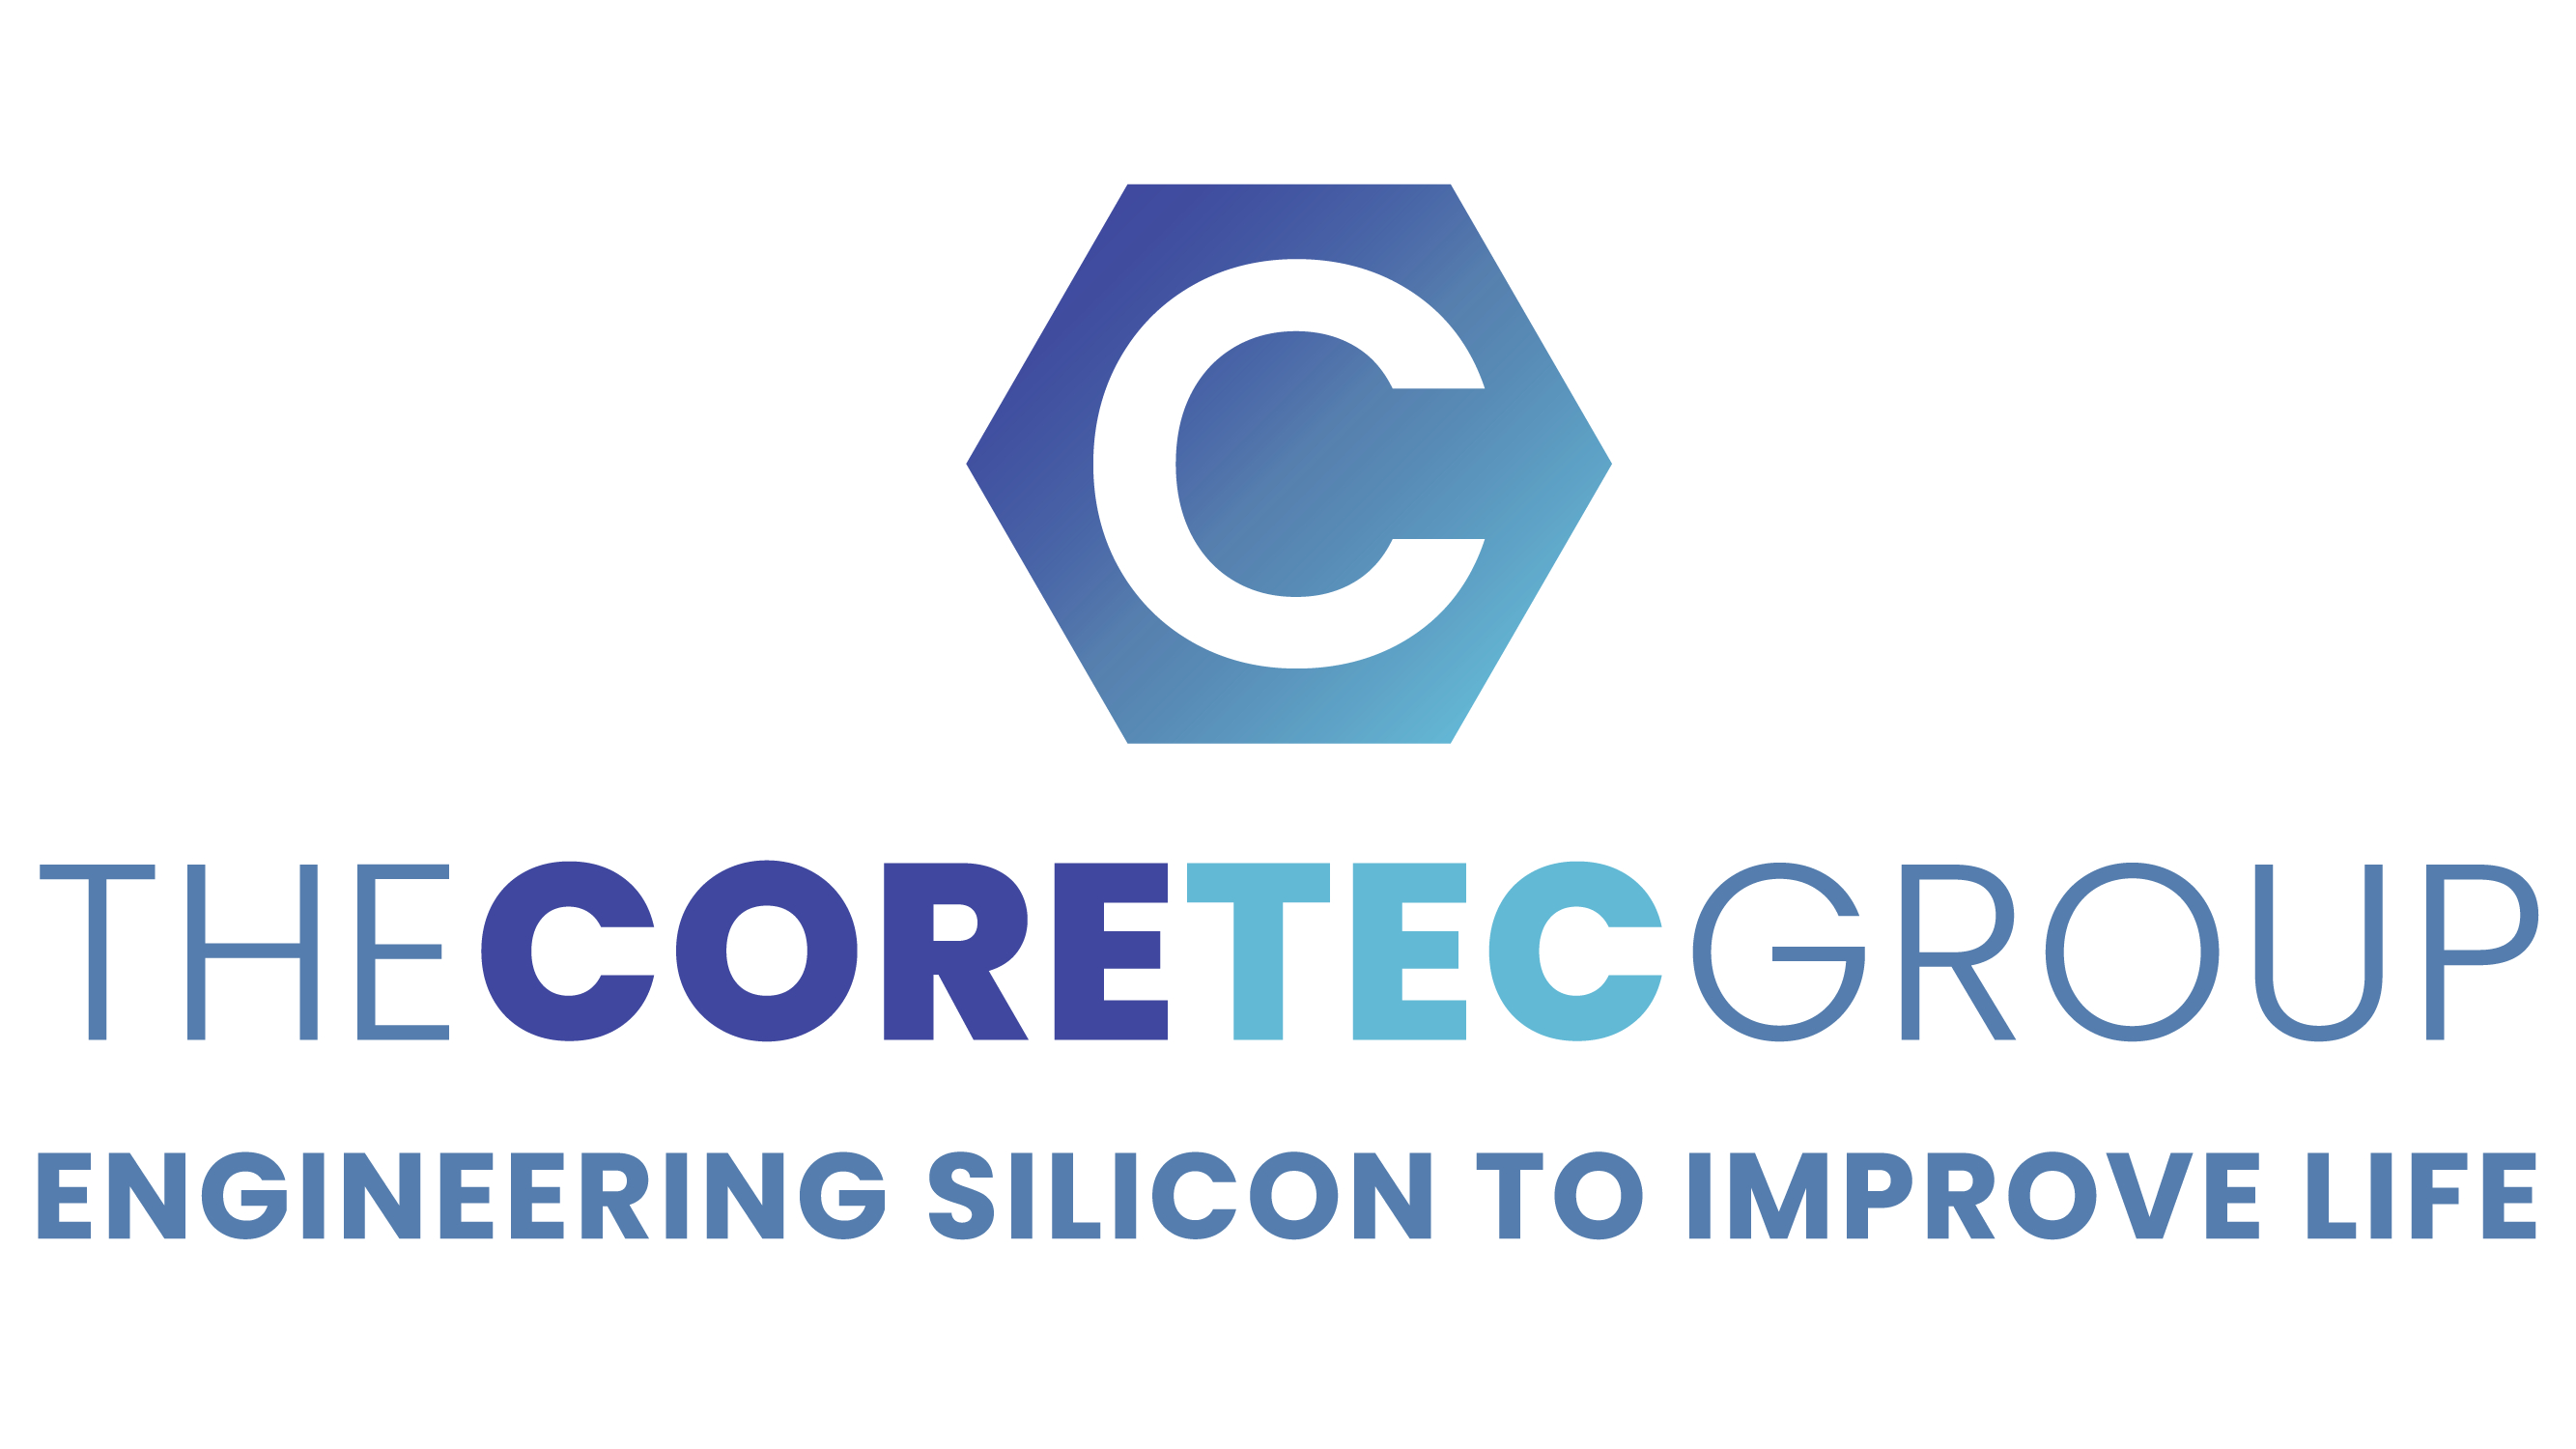 The Coretec Group to Host a Shareholder Call on August 17 to Highlight 2022 Milestones and Outline End-of-Year Goals